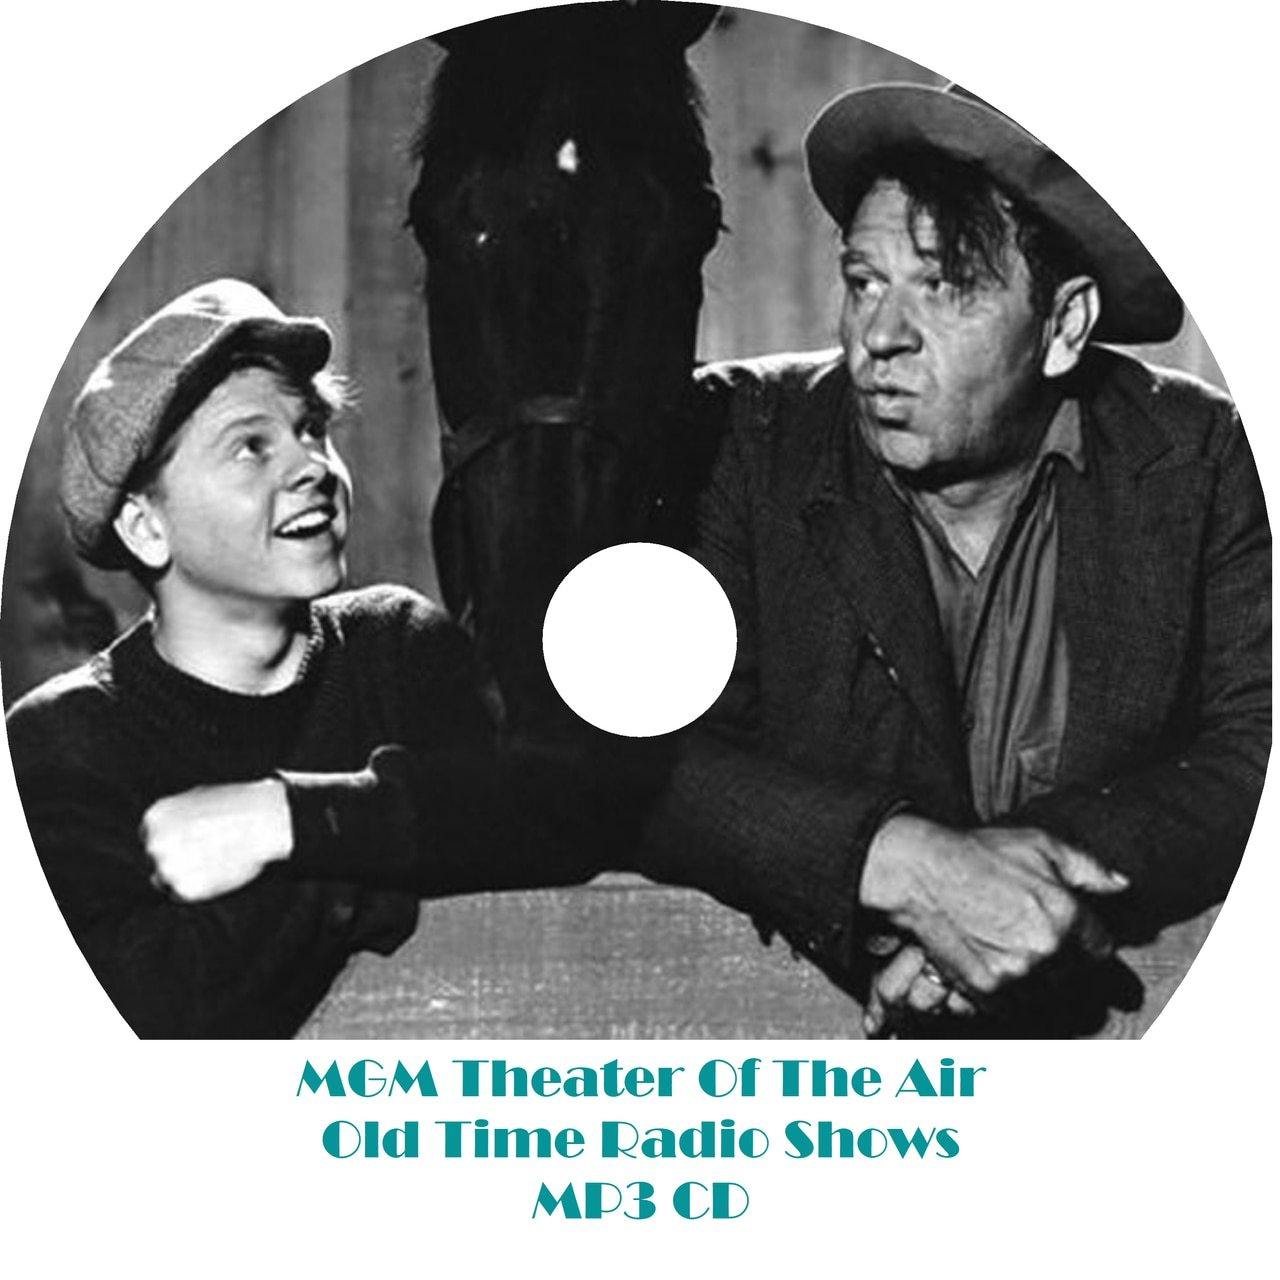 MGM Theater of the Air Old Time Radio Shows 18 Episodes On MP3 CD - OTR World